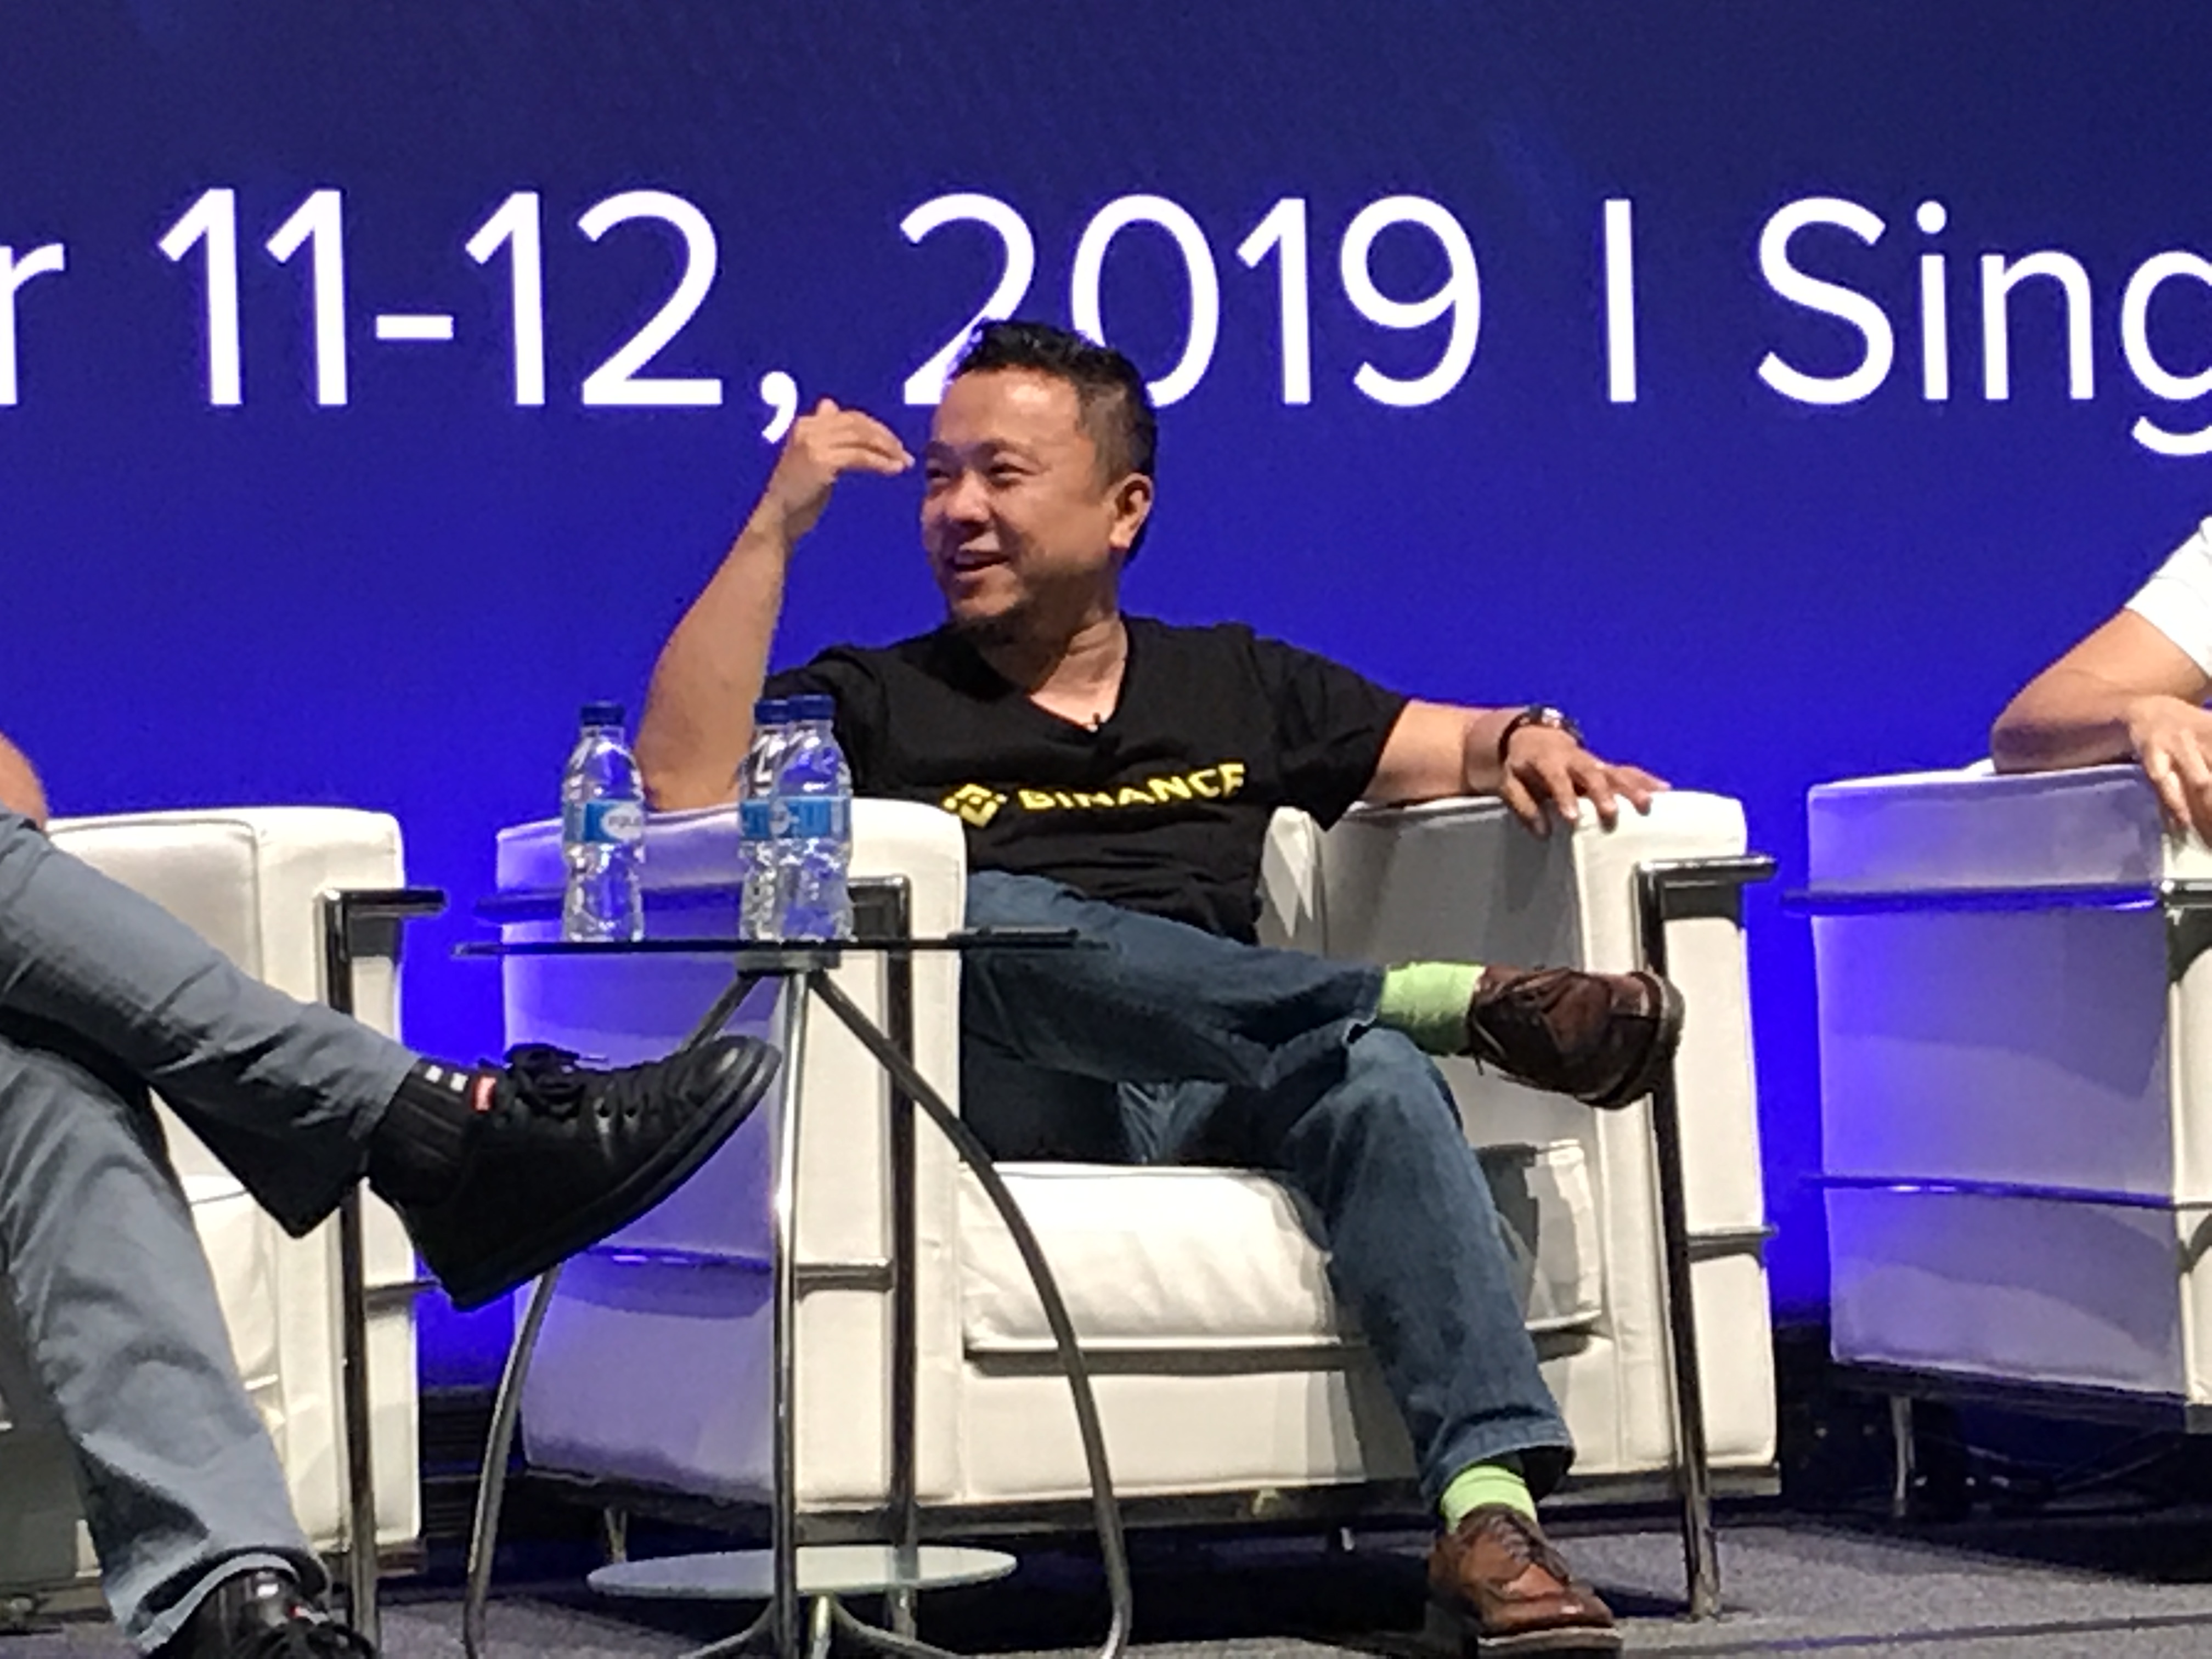 Binance To List Its New Dollar-Backed BUSD Stablecoin Next Week